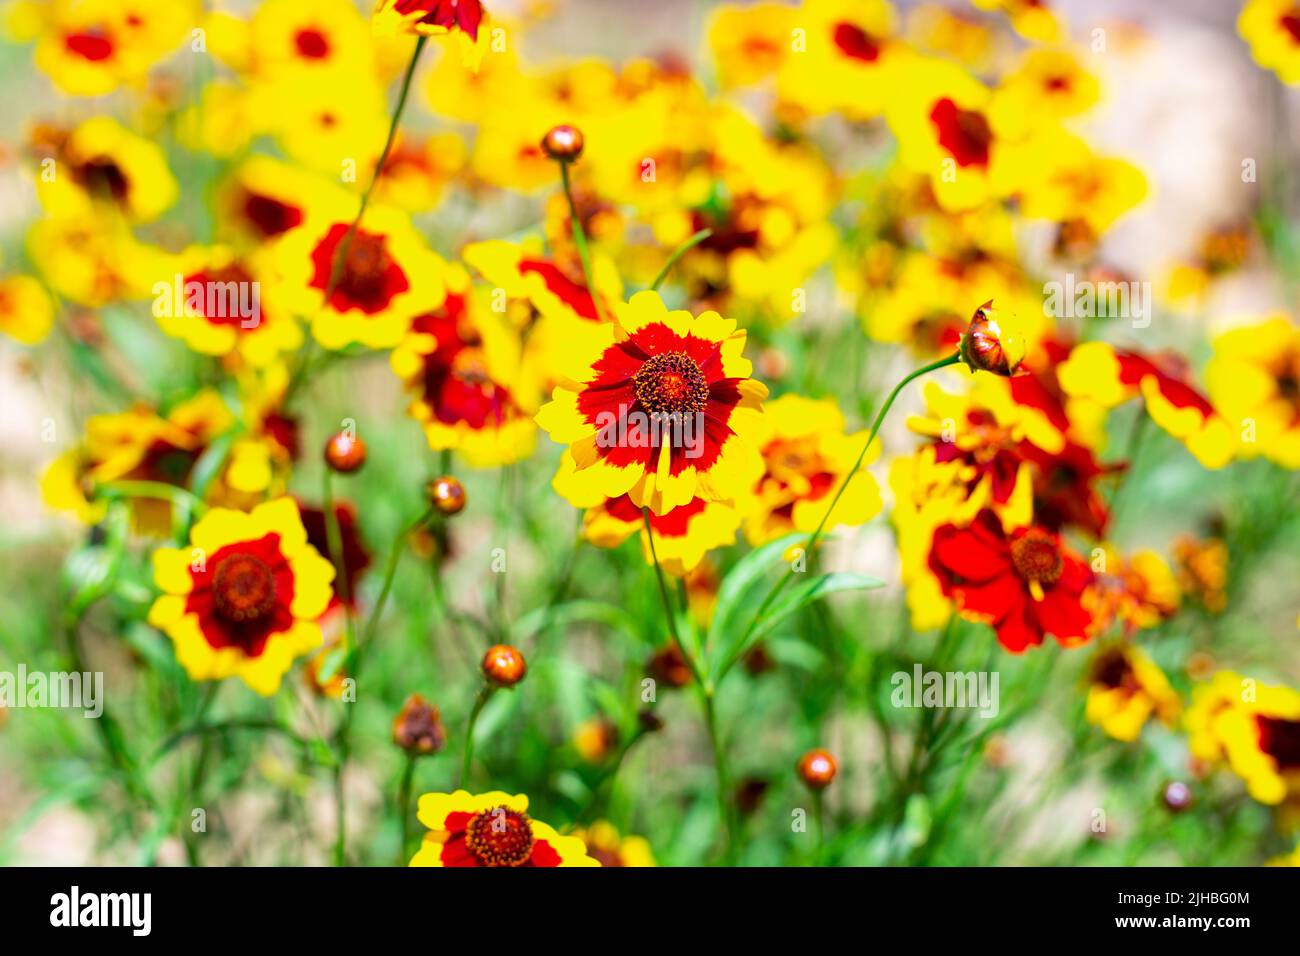 Bright yellow flowers with an orange center coreopsis in the garden, top view. Summer floral background. Stock Photo